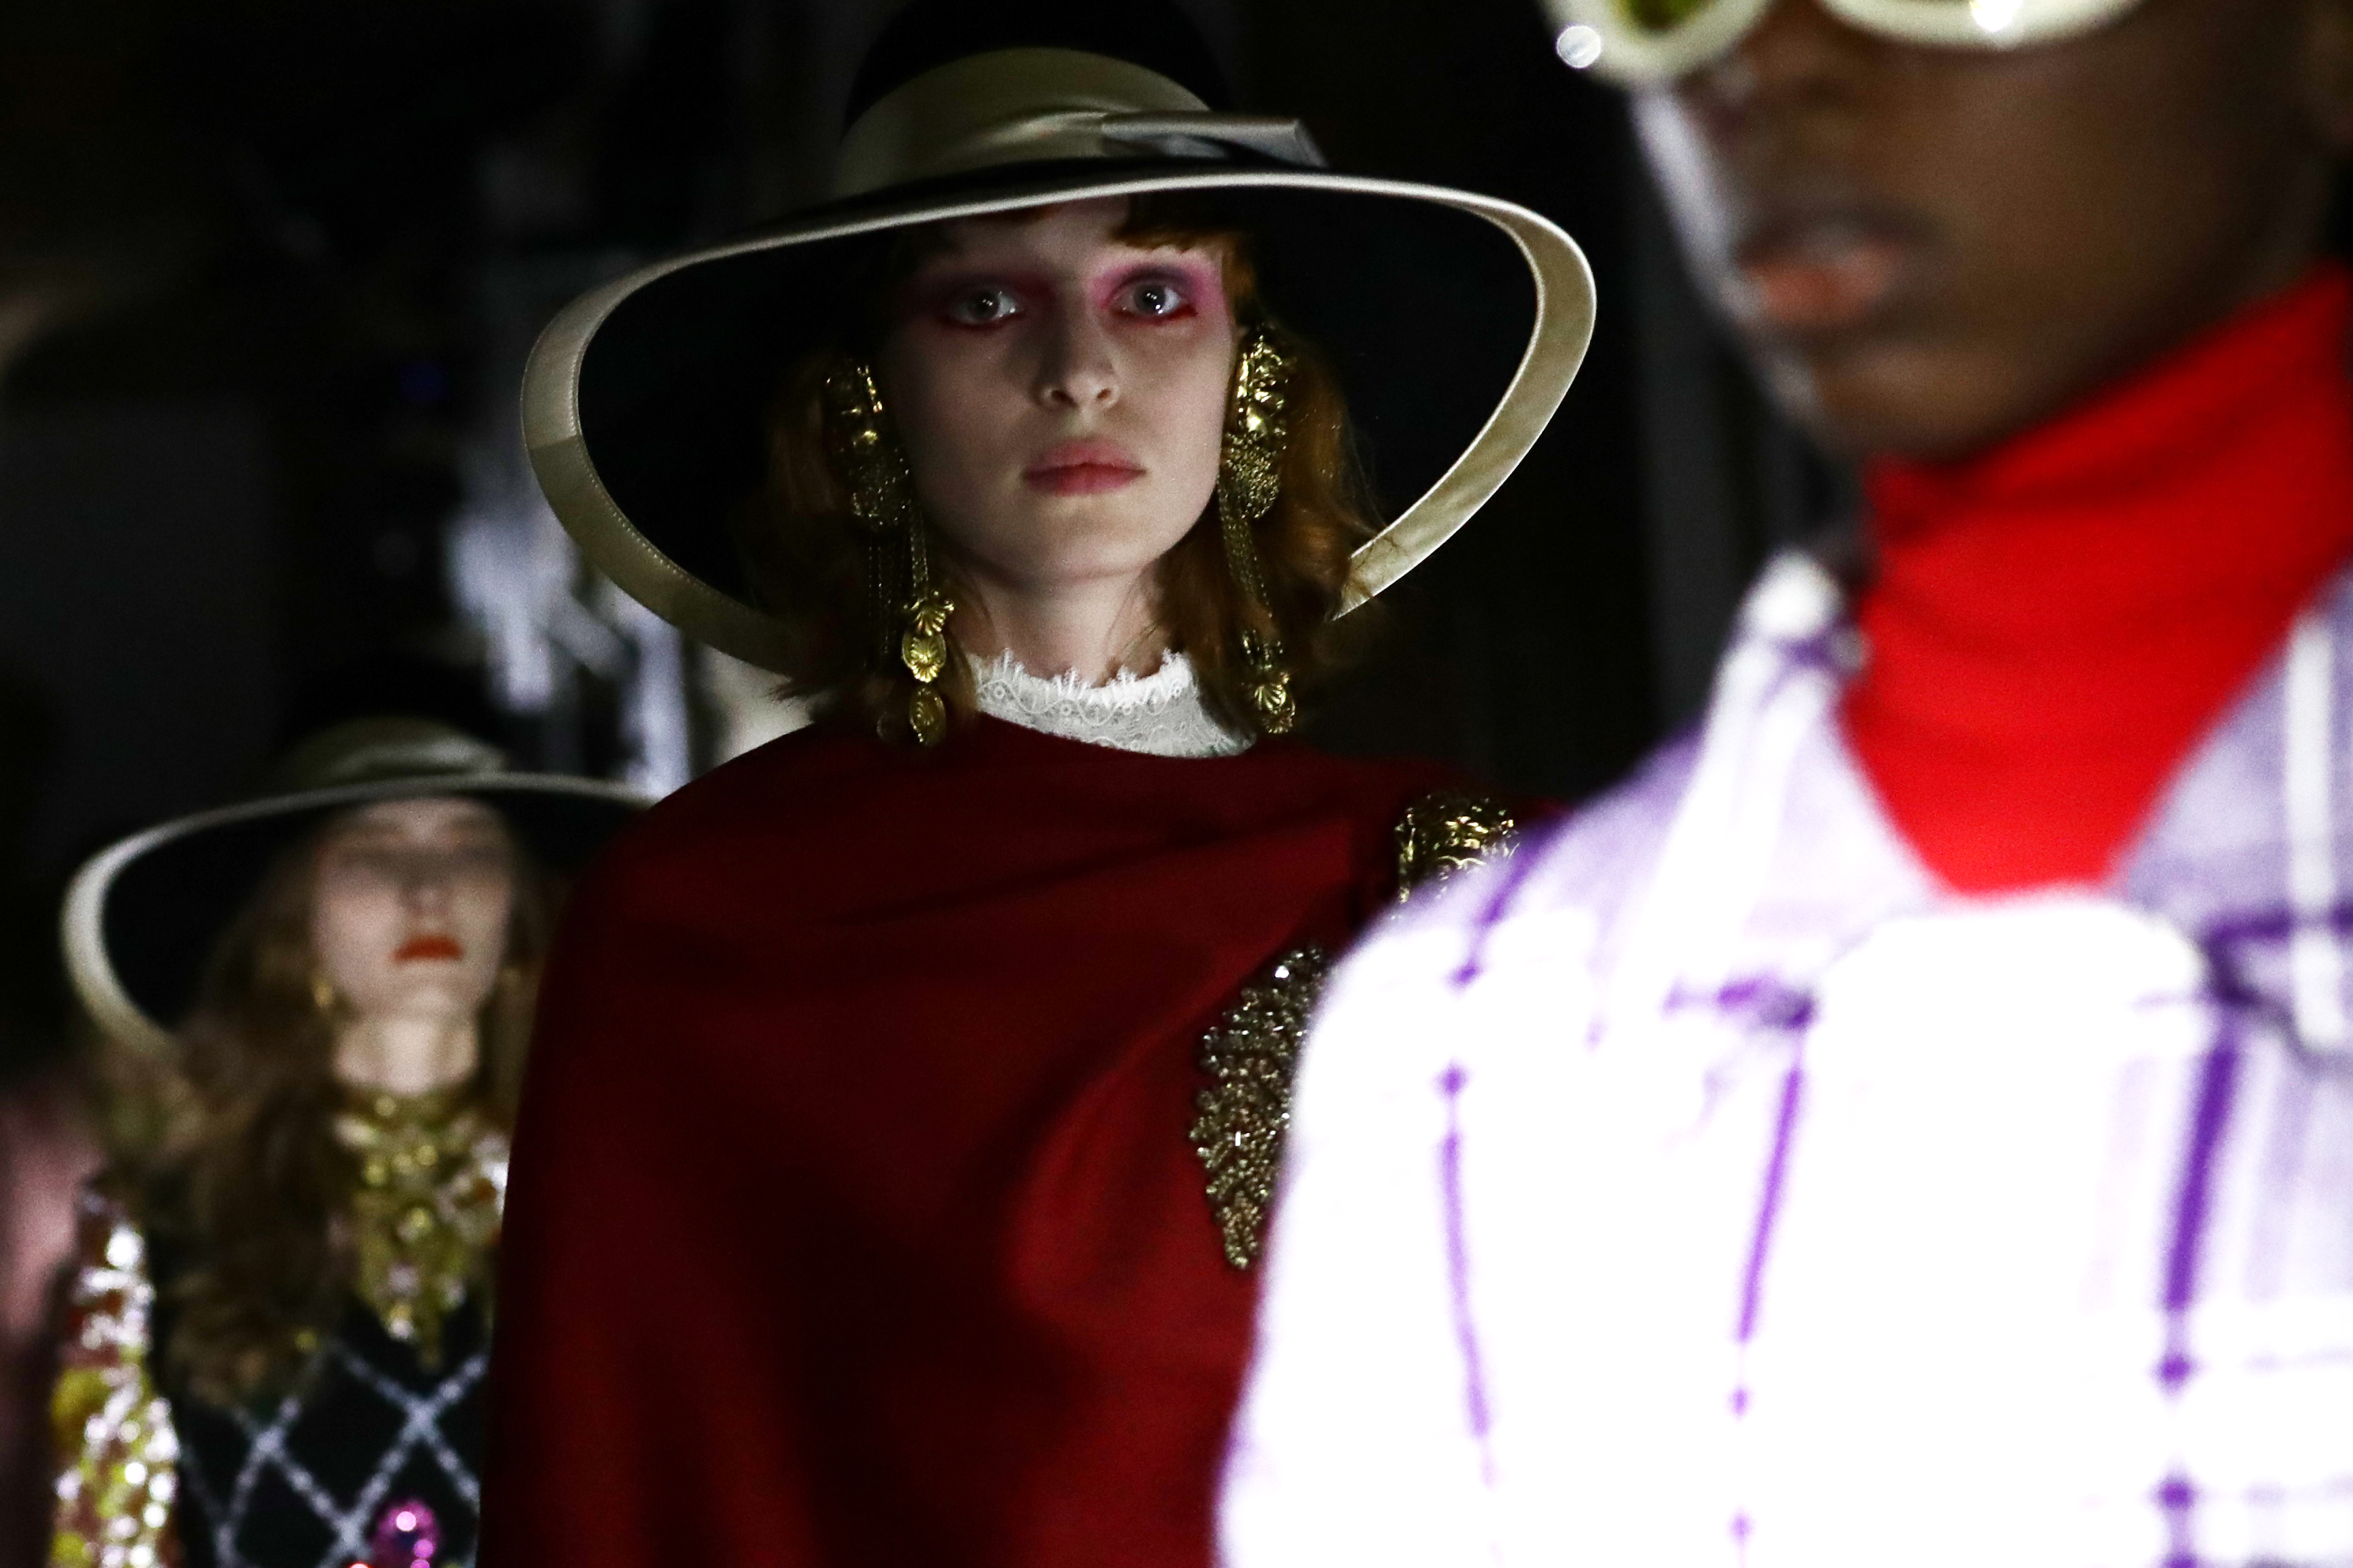 A model walks the runway at the Gucci Cruise 2020 show at Musei Capitolini on May 28, 2019 in Rome, Italy. (Vittorio Zunino Celotto/Getty Images for Gucci)